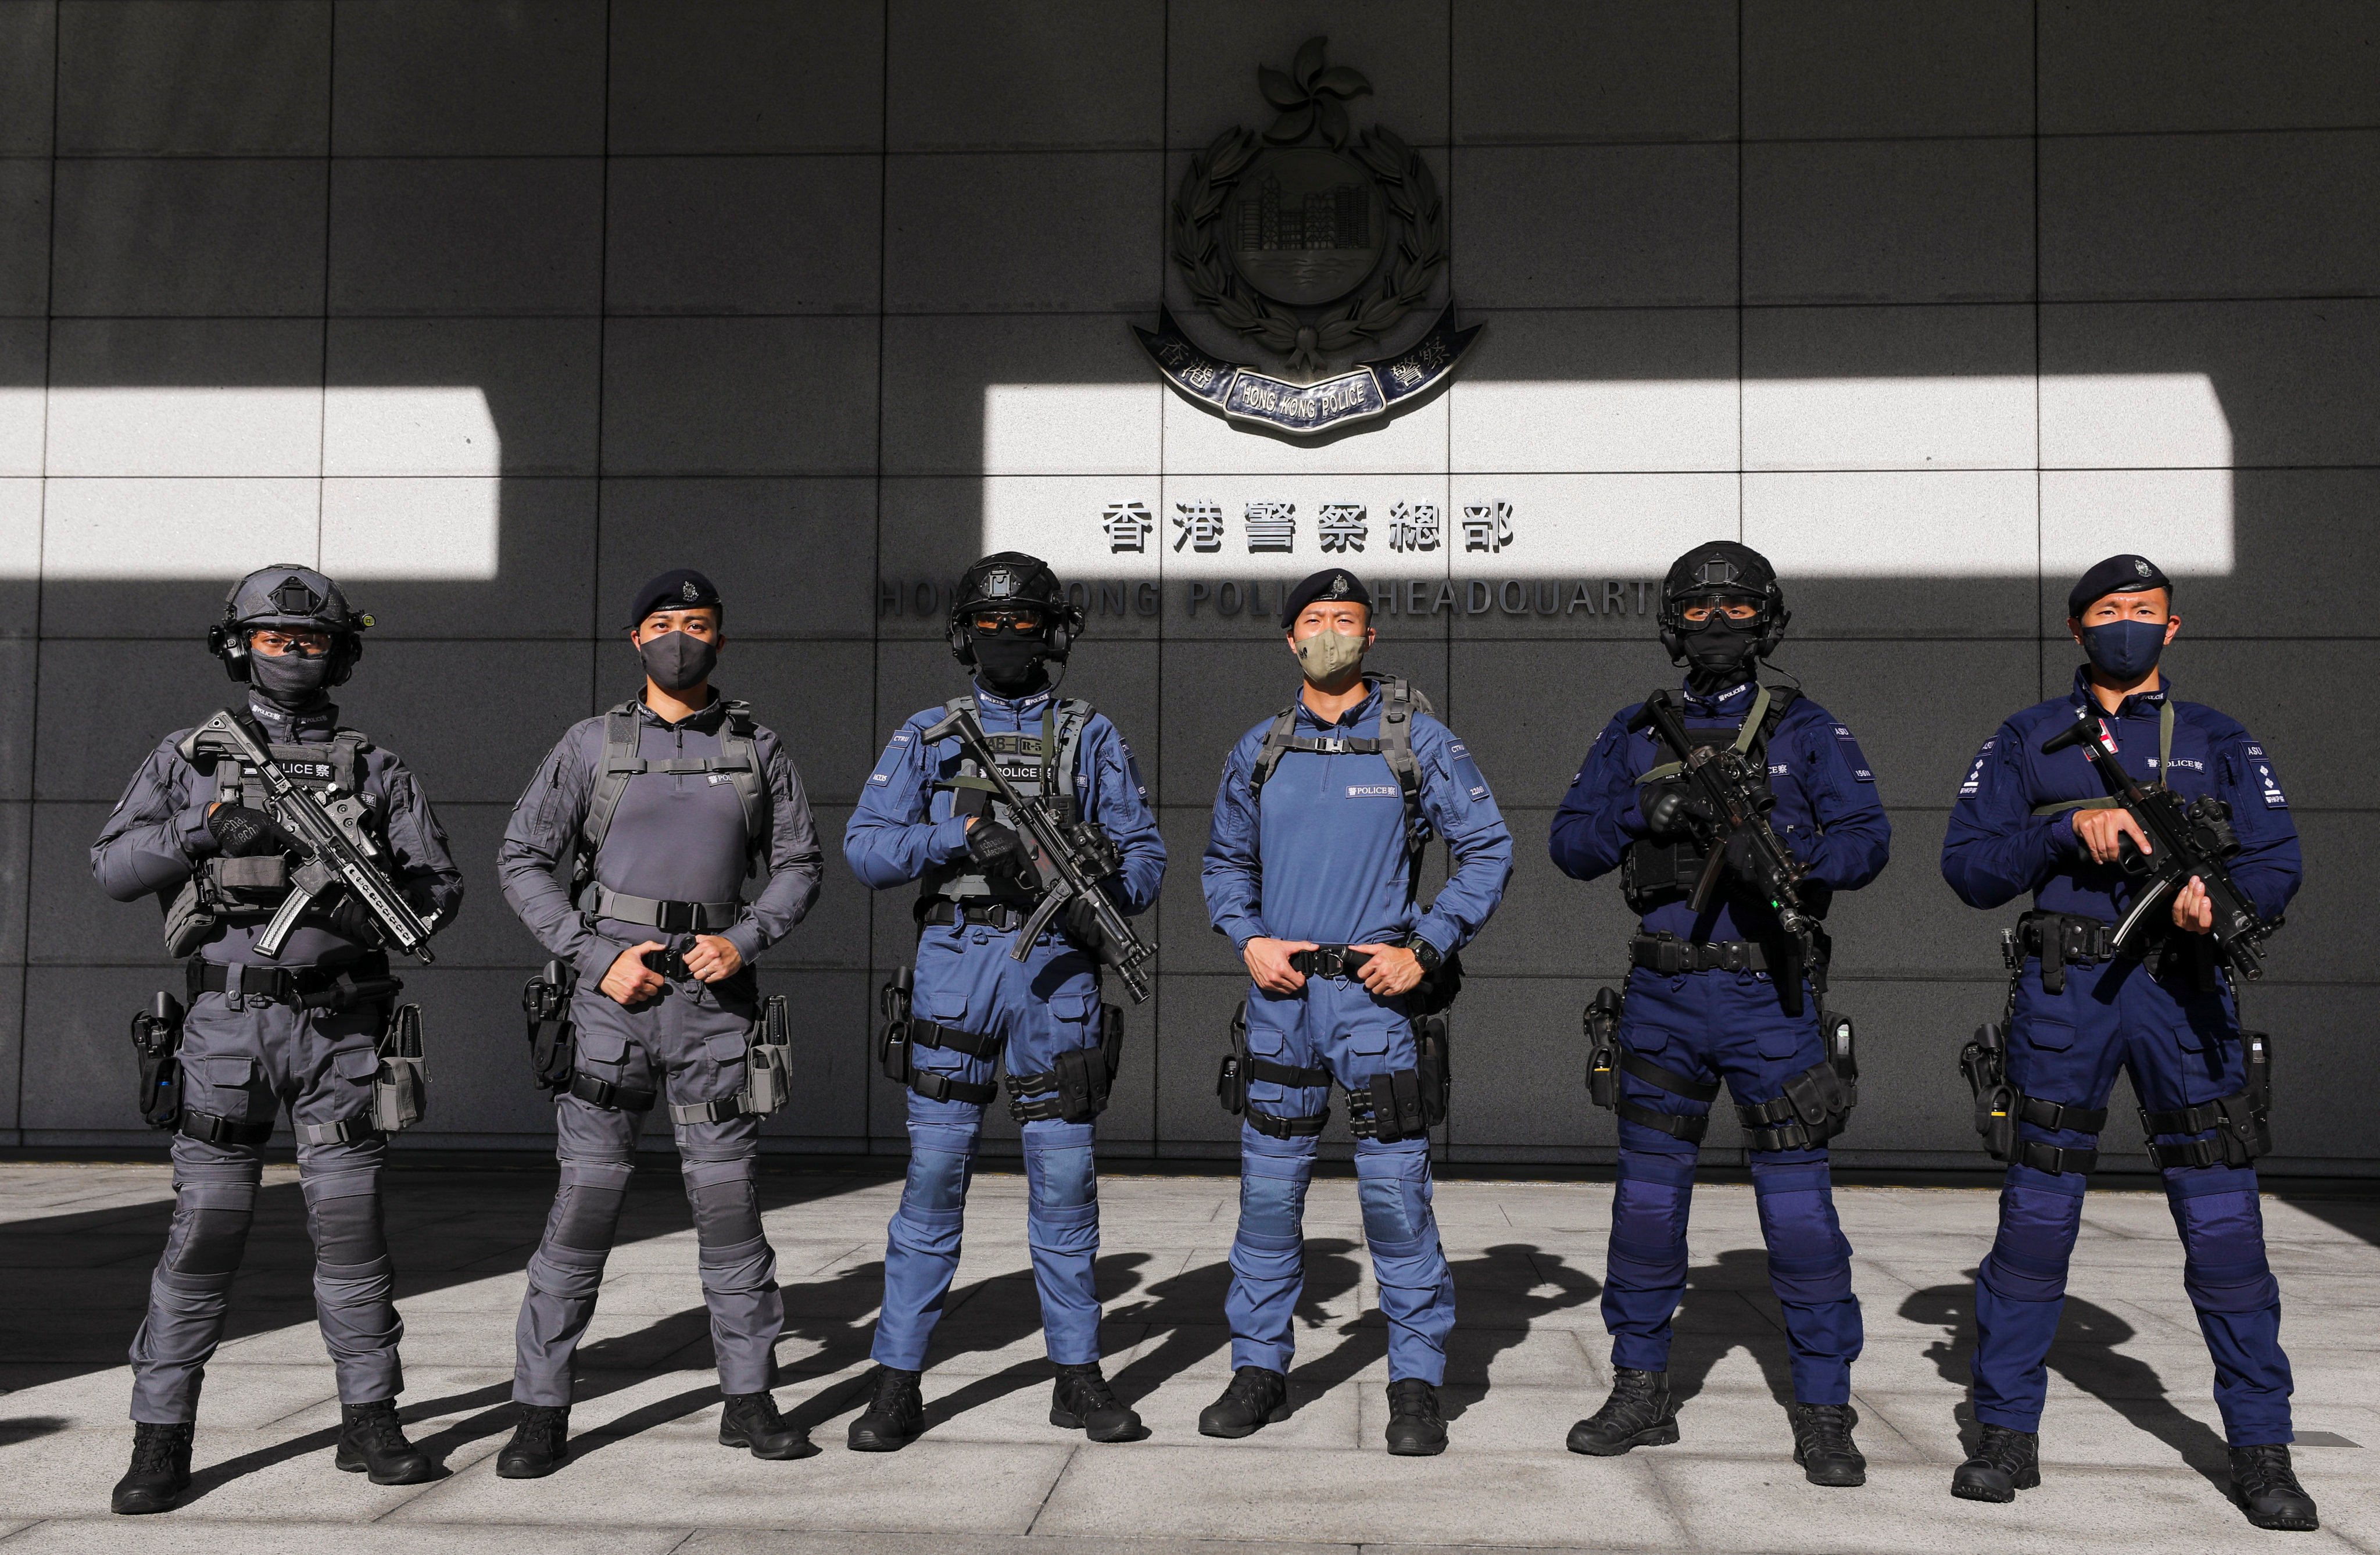 The new uniforms (left to right): the Railway Response Team’s full kit and light kit; the Counter Terrorism Response Unit’s full and light kit; and the Airport Security Unit’s full and light kit. Photo: Xiaomei Chen